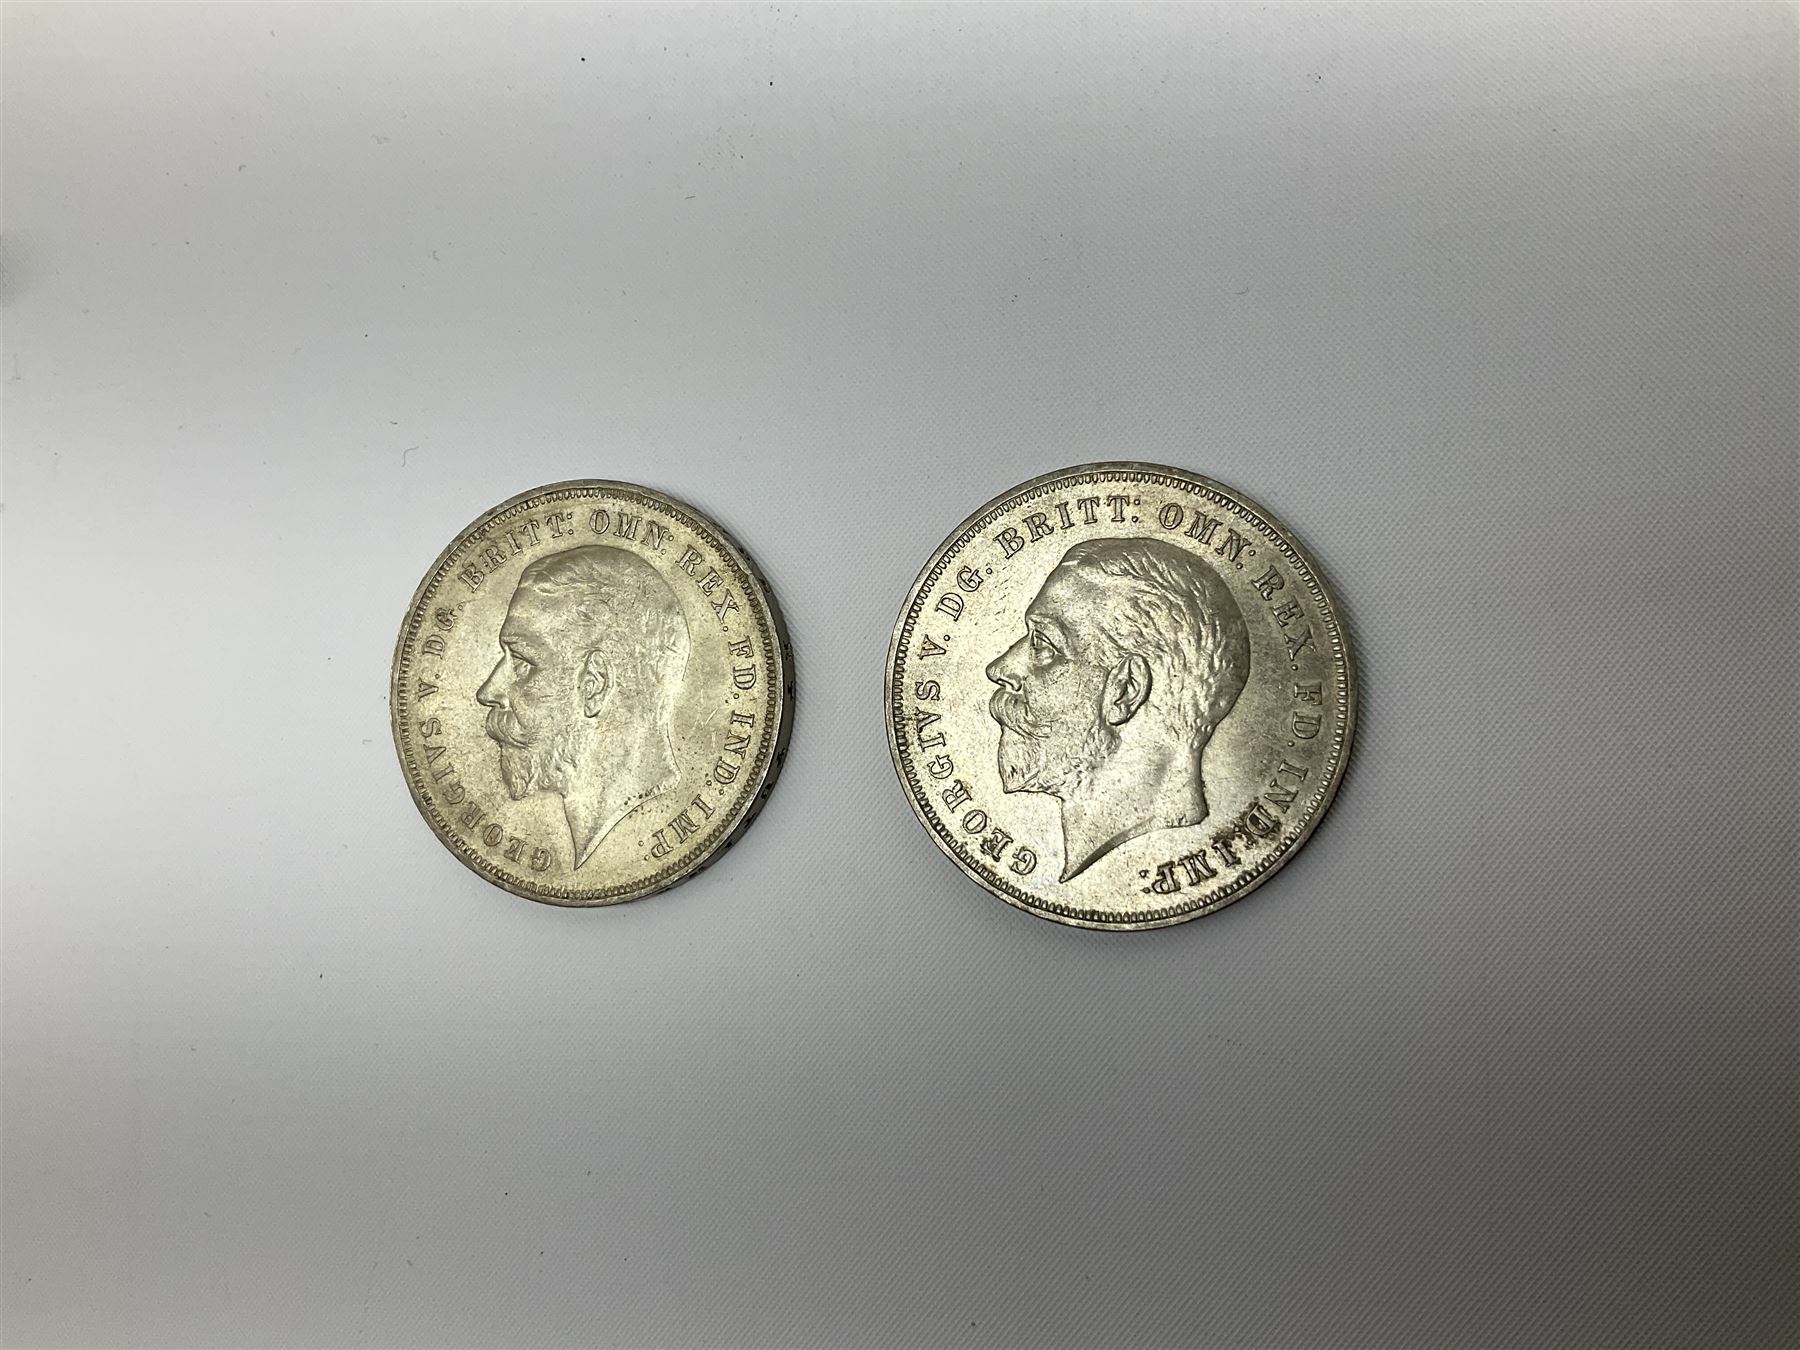 Two Great British King George V 1935 crown coins - Image 2 of 6